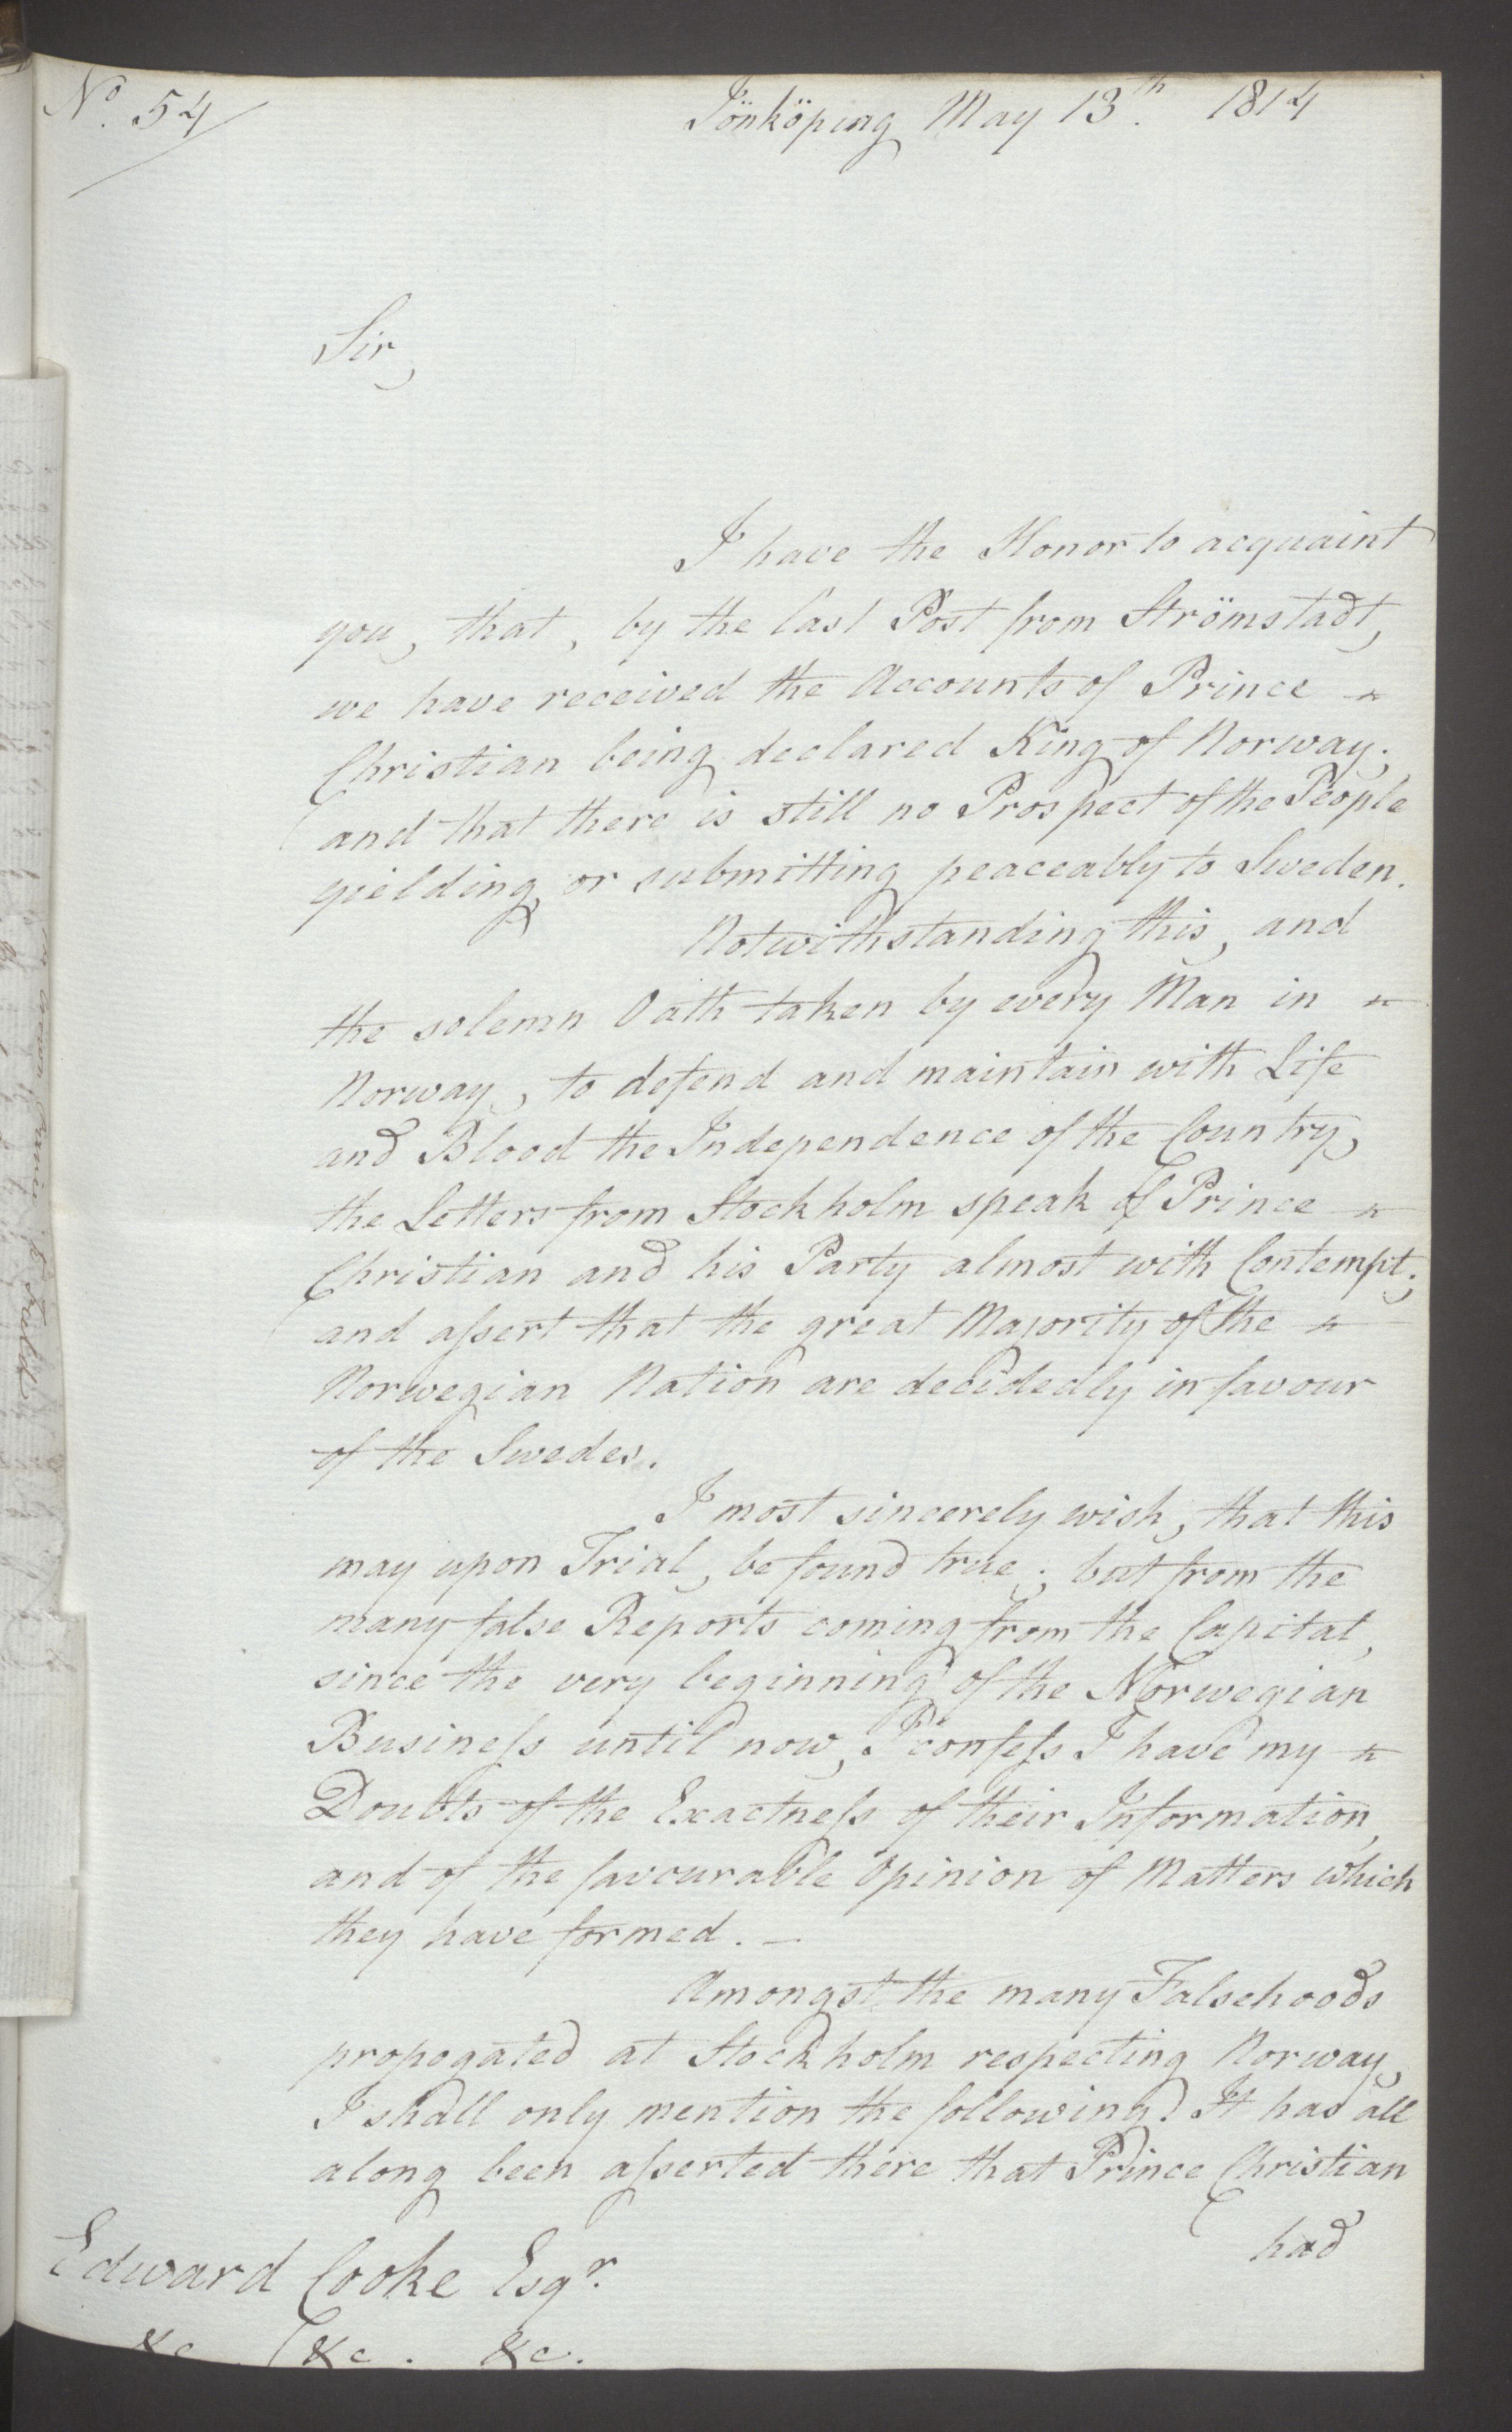 Foreign Office*, UKA/-/FO 38/16: Sir C. Gordon. Reports from Malmö, Jonkoping, and Helsingborg, 1814, p. 45